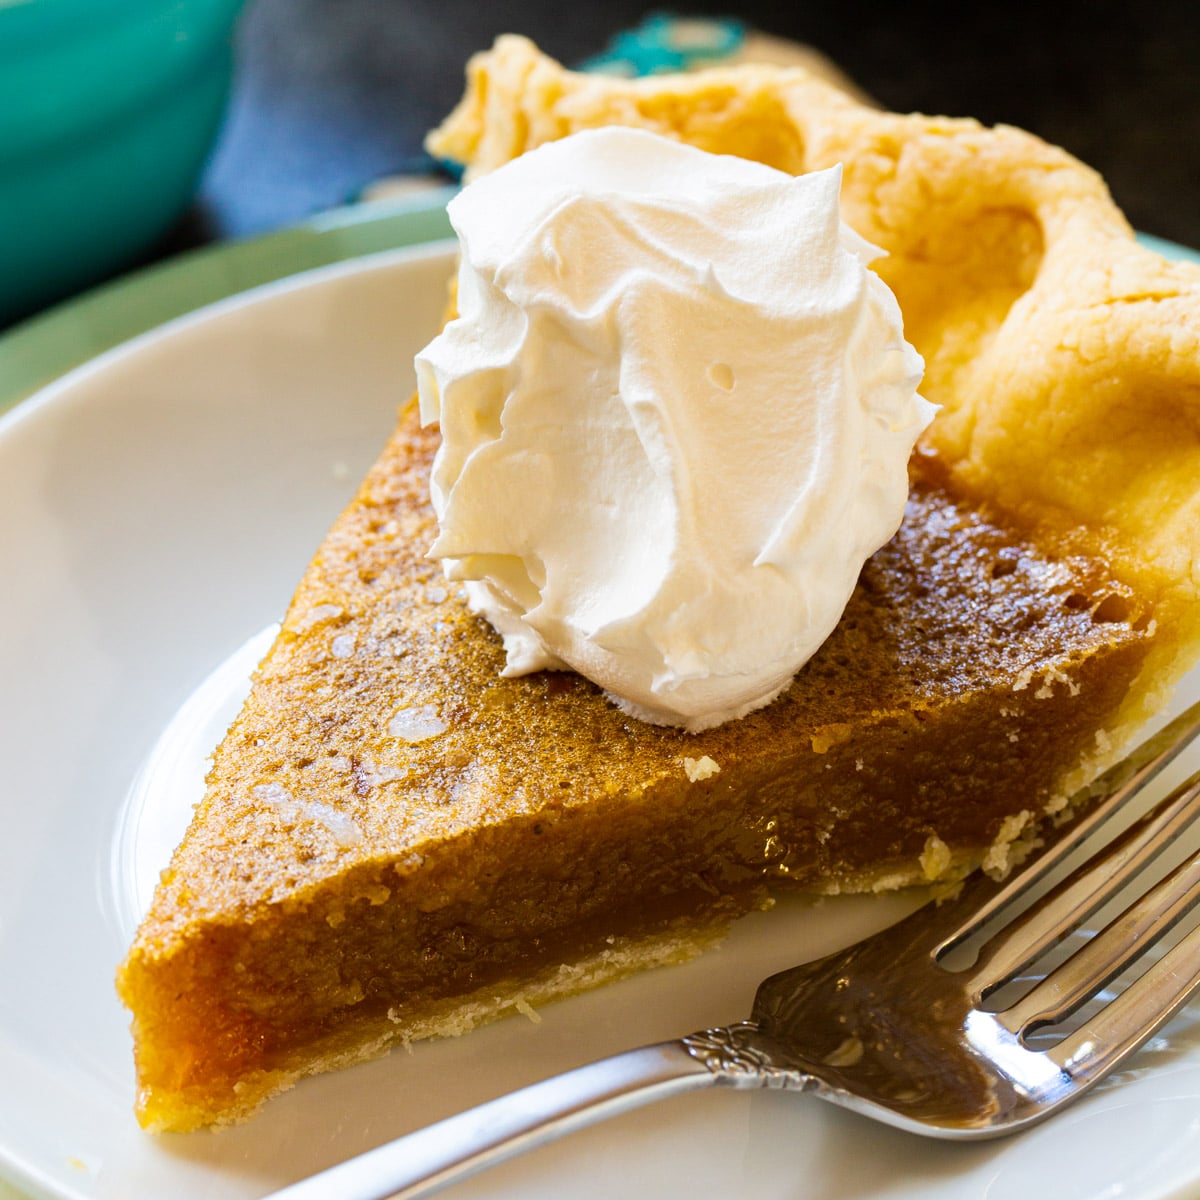 Slice of caramel chess pie topped with whipped cream.